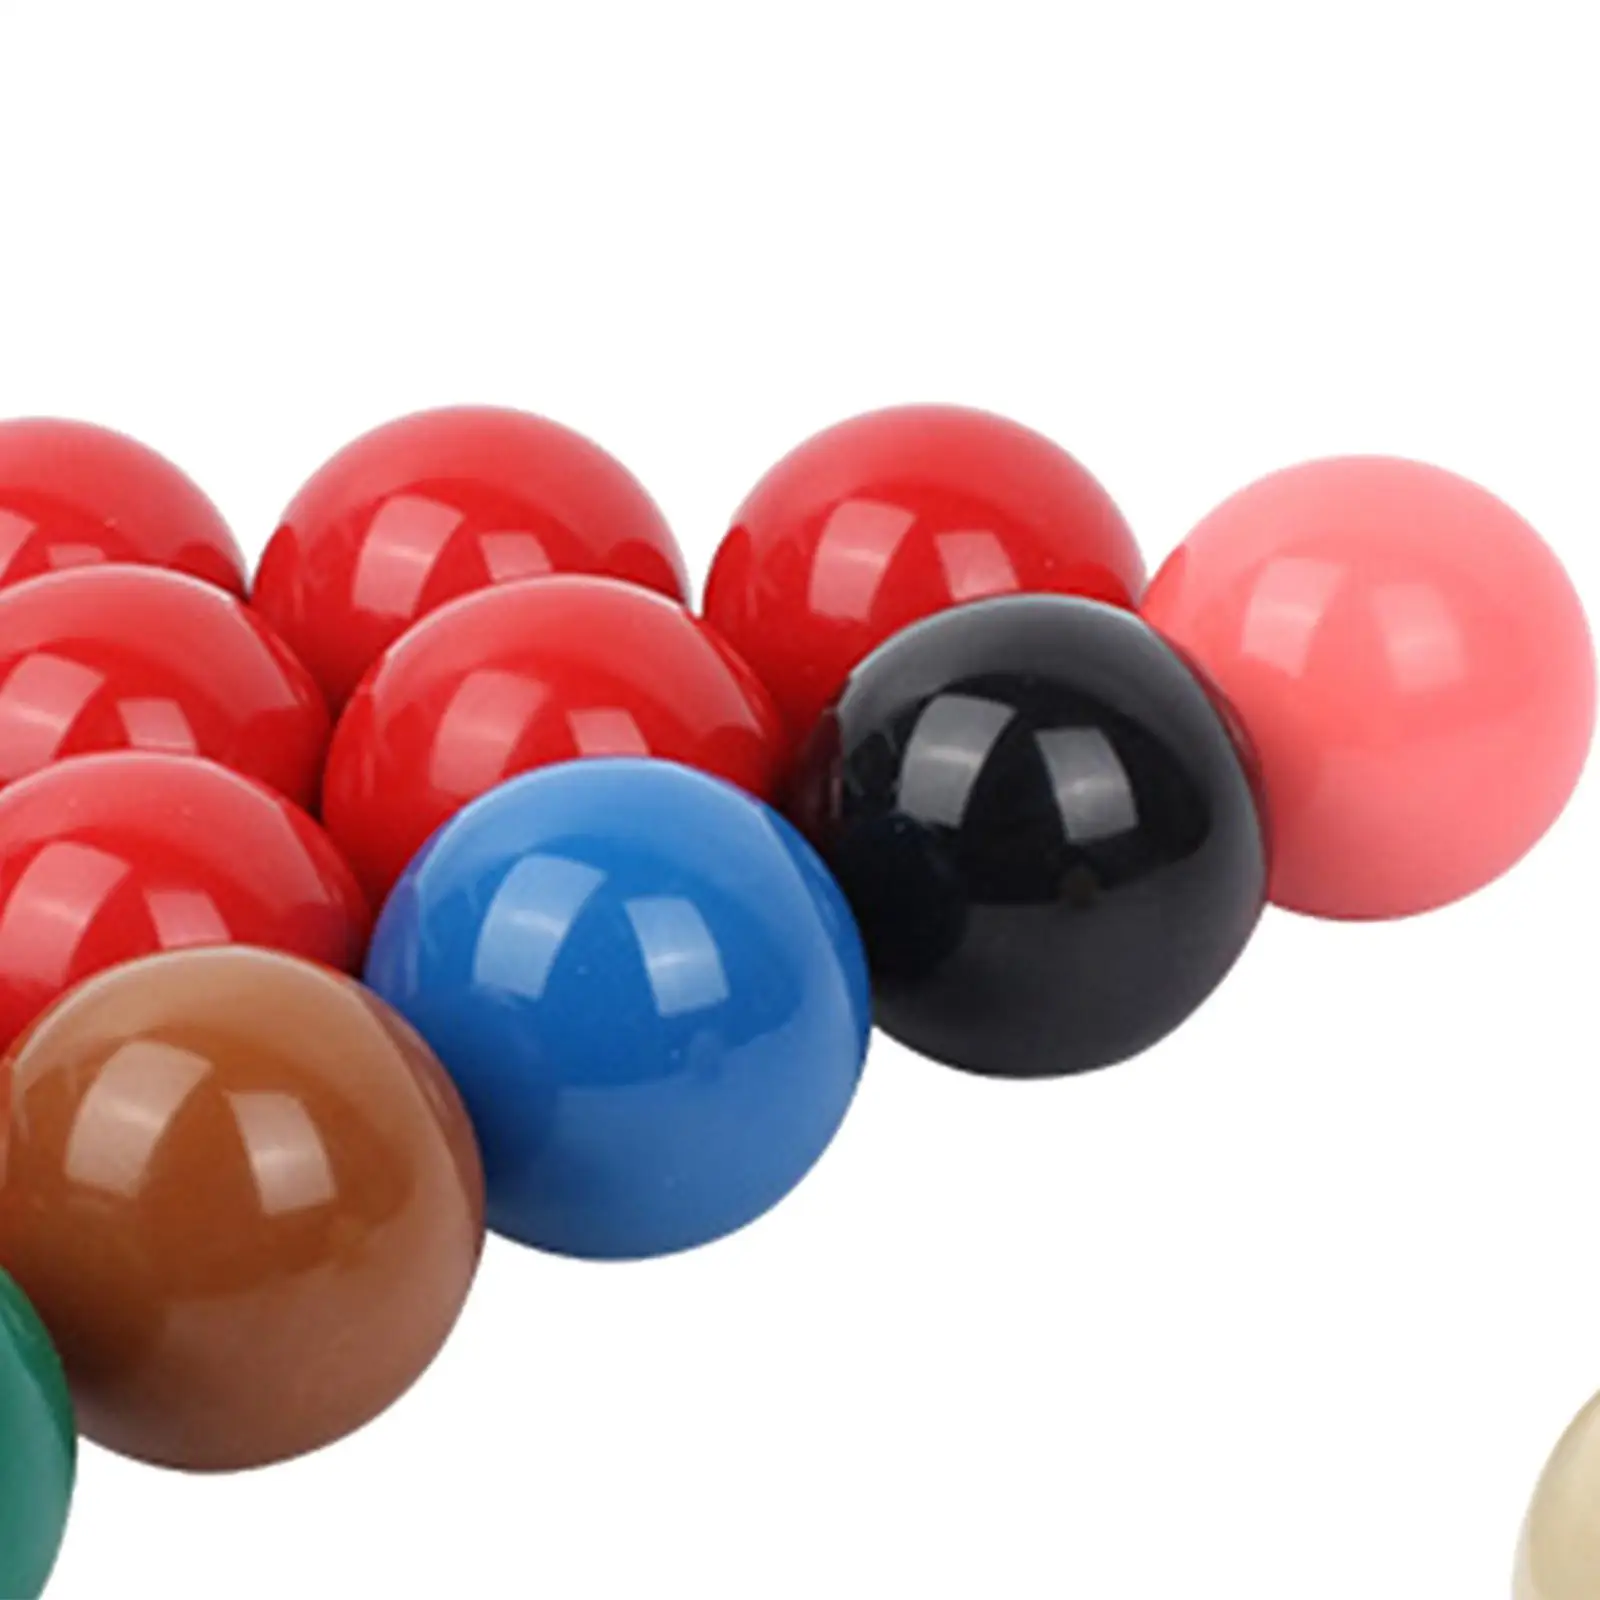 22 Pieces Billiards Table Balls Set, Pool Table Balls Snooker Training Balls Professional Snooker Ball Set for Leisure Sports